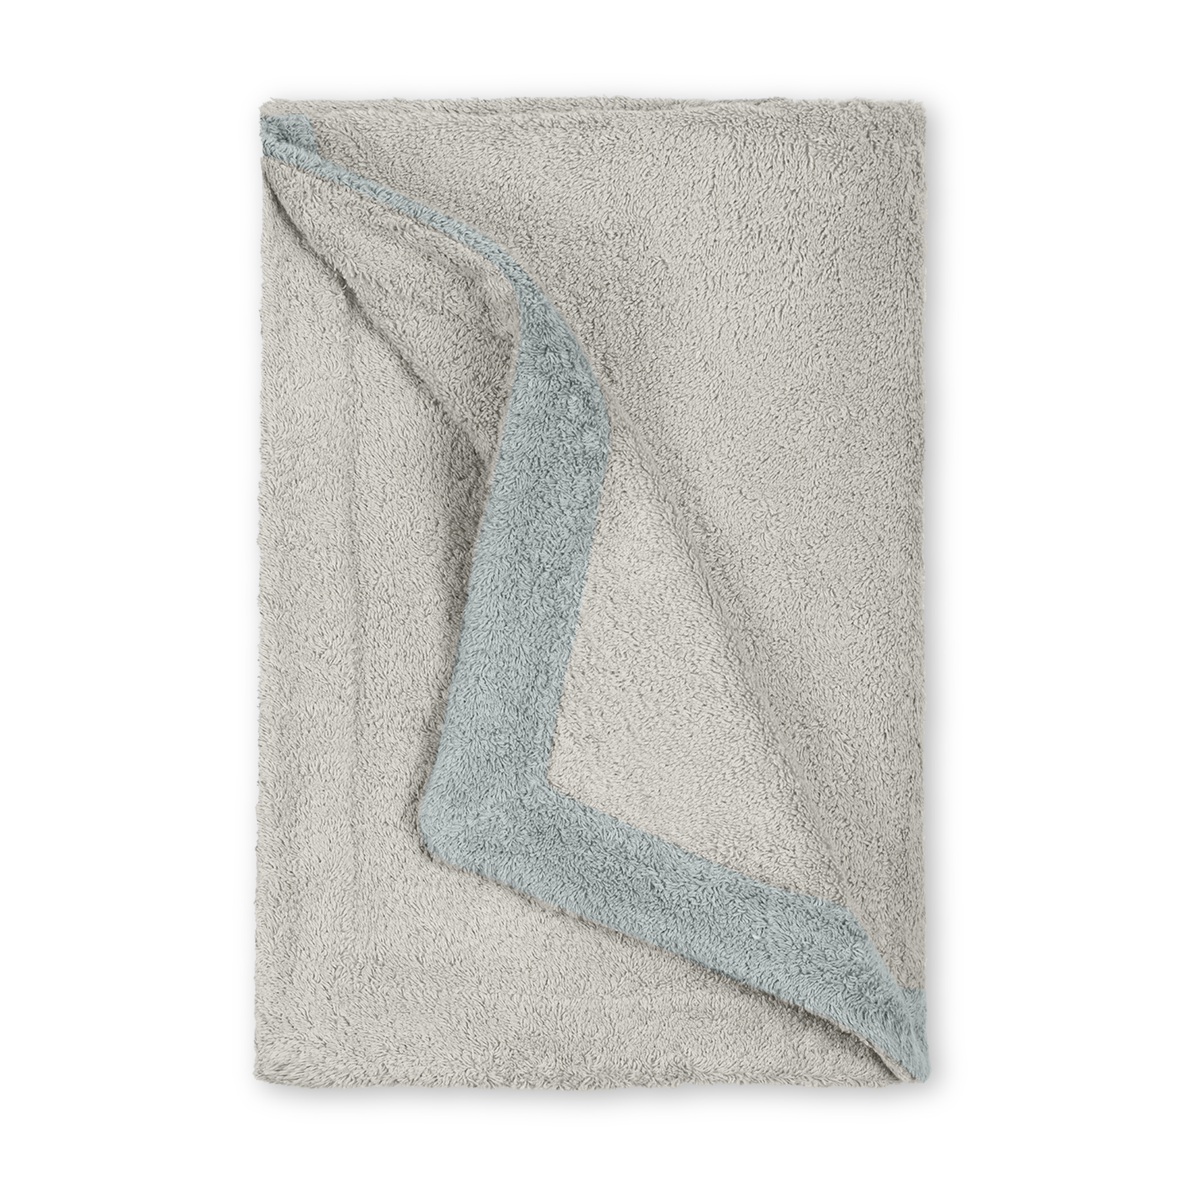 Folded Matouk Helios Beach Towels in Pearl/Pool Color